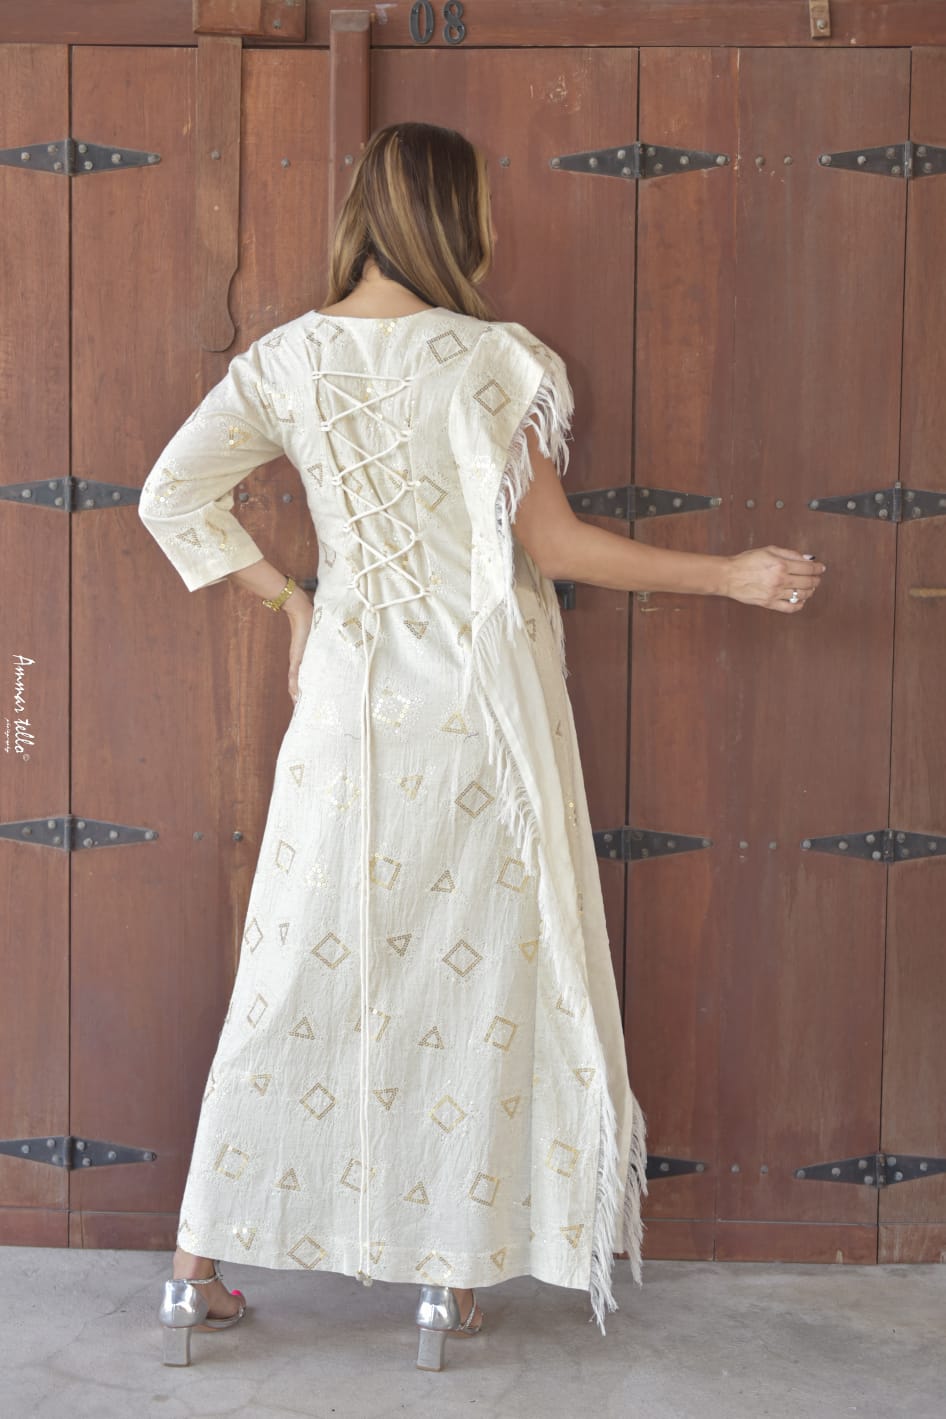 Beautiful modern dress with folk embroidery in geometric shapes with one sleeve